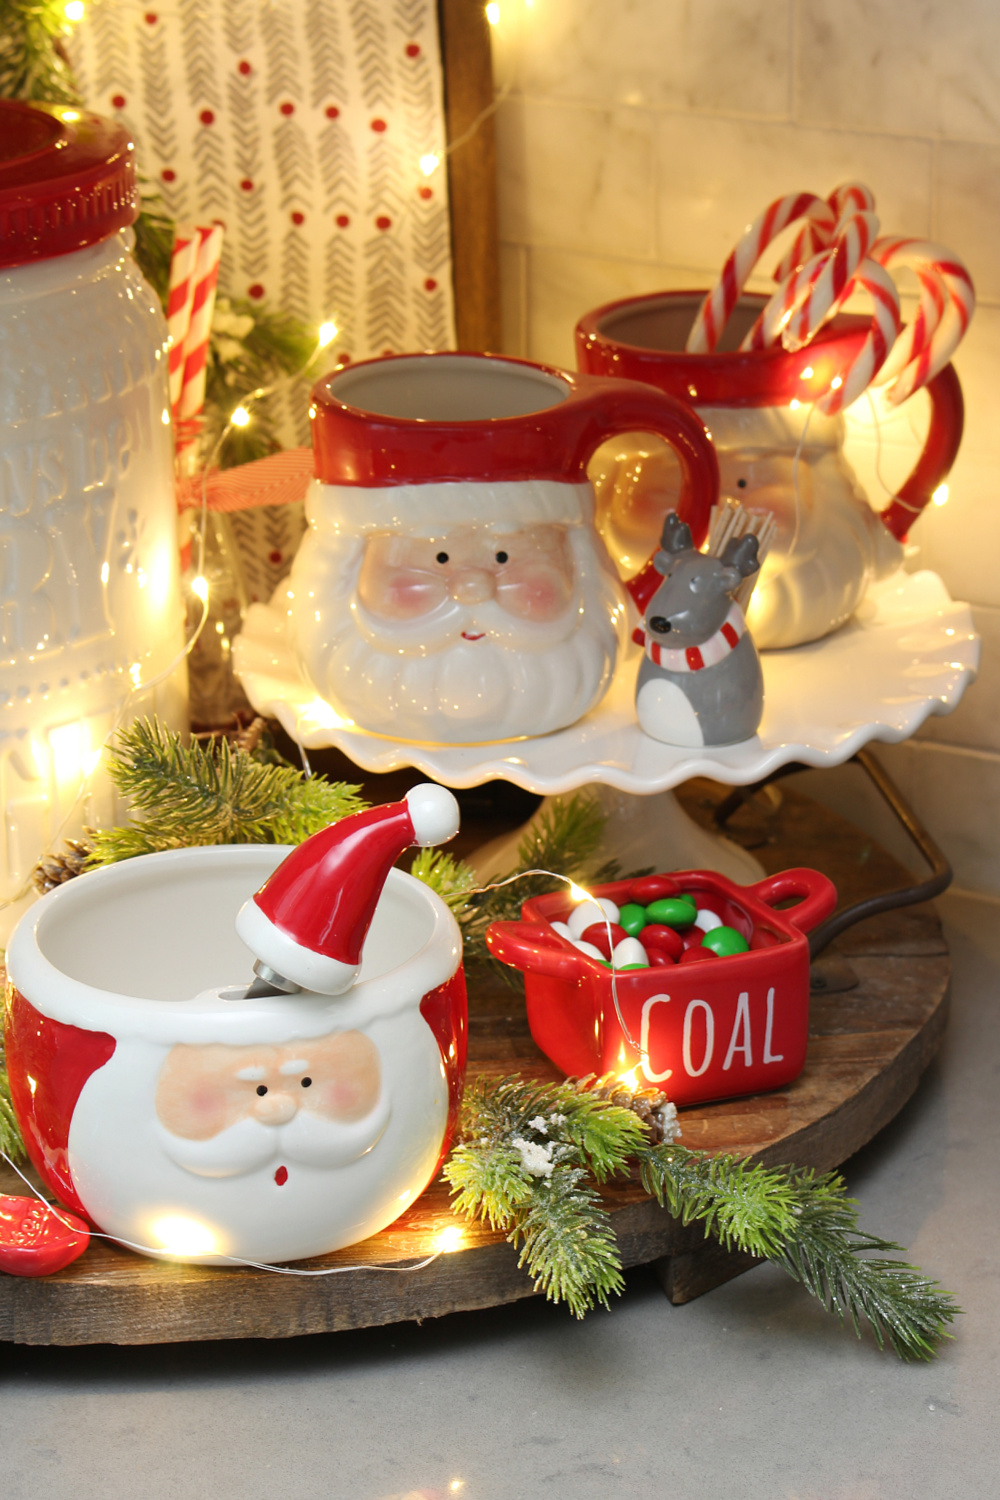 Red and white Christmas kitchen display with Santa mugs and twinkle lights.